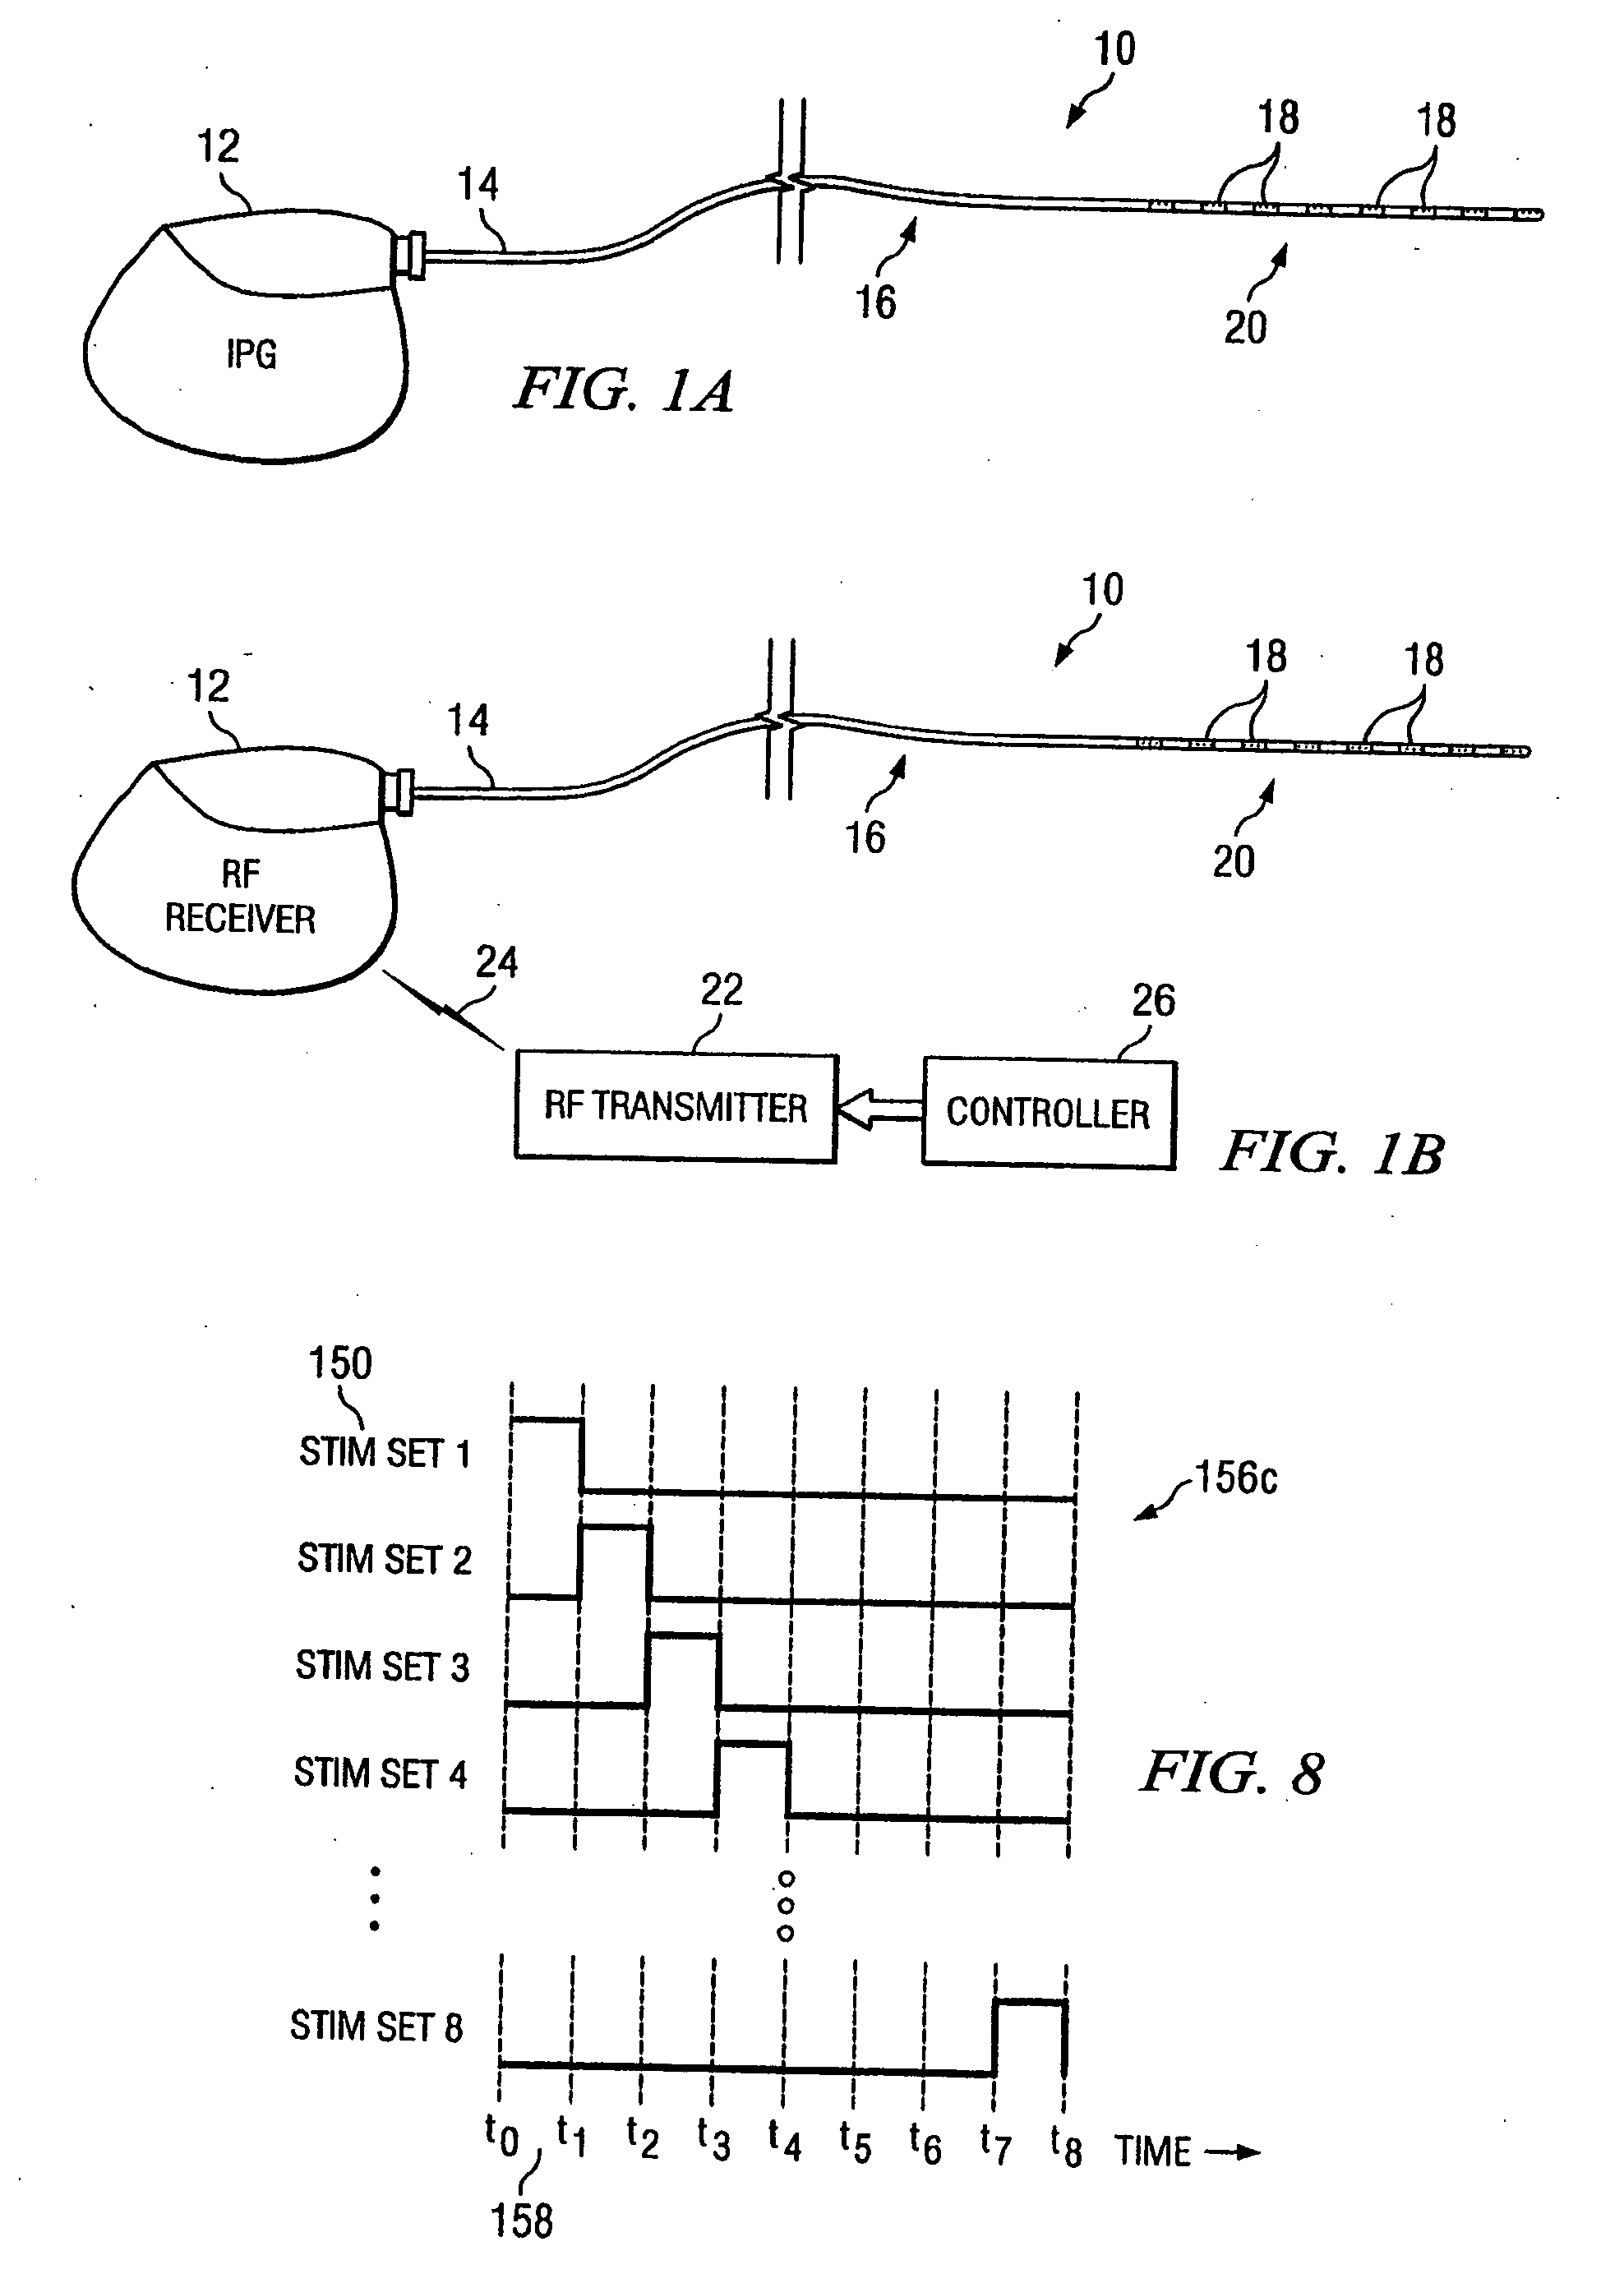 Electrical stimulation system and method for stimulating tissue in the brain to treat a neurological condition